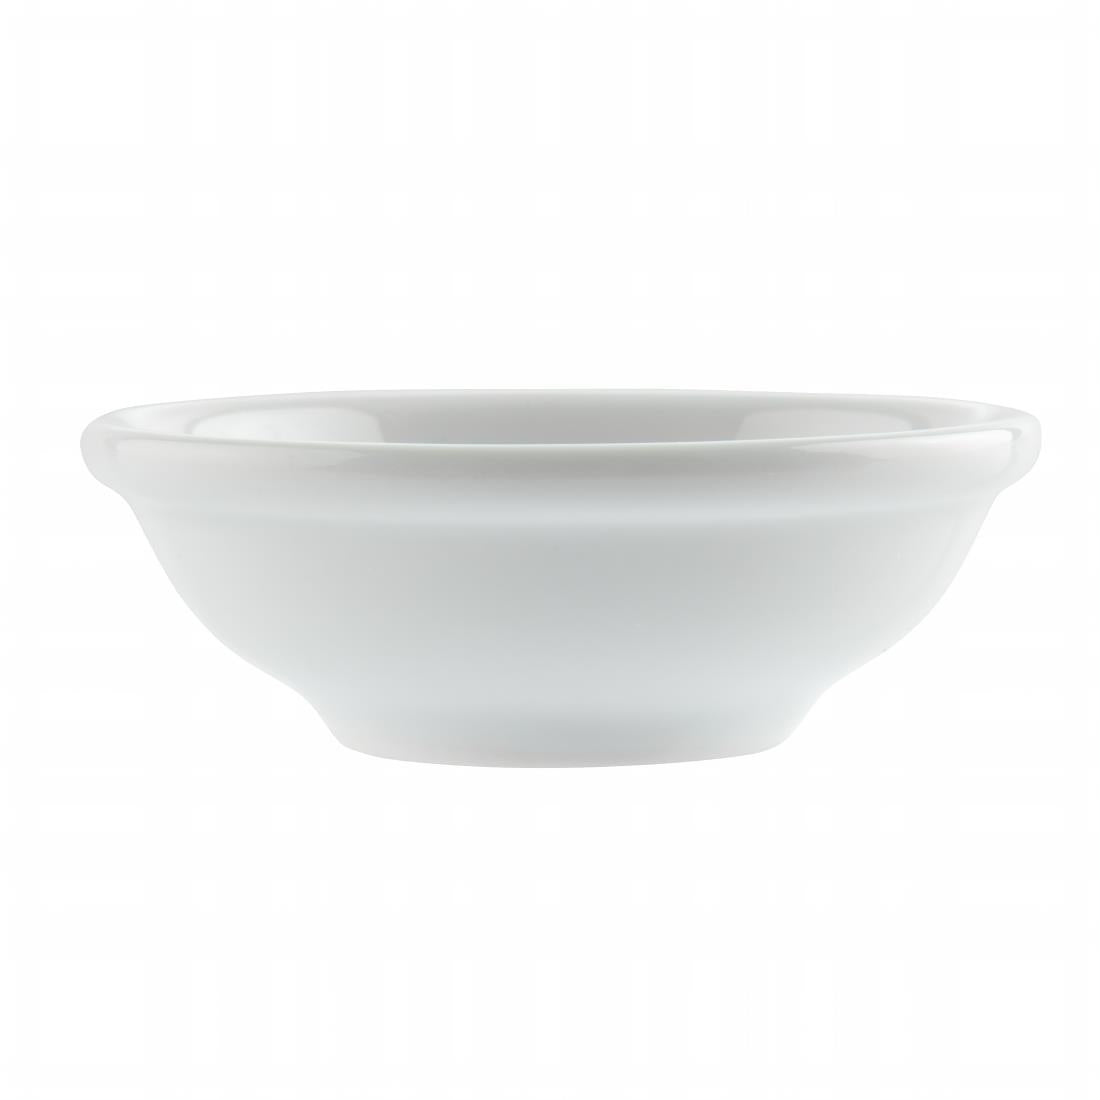 CG134 Royal Porcelain Oriental Soy Sauce Dishes (Pack of 12)